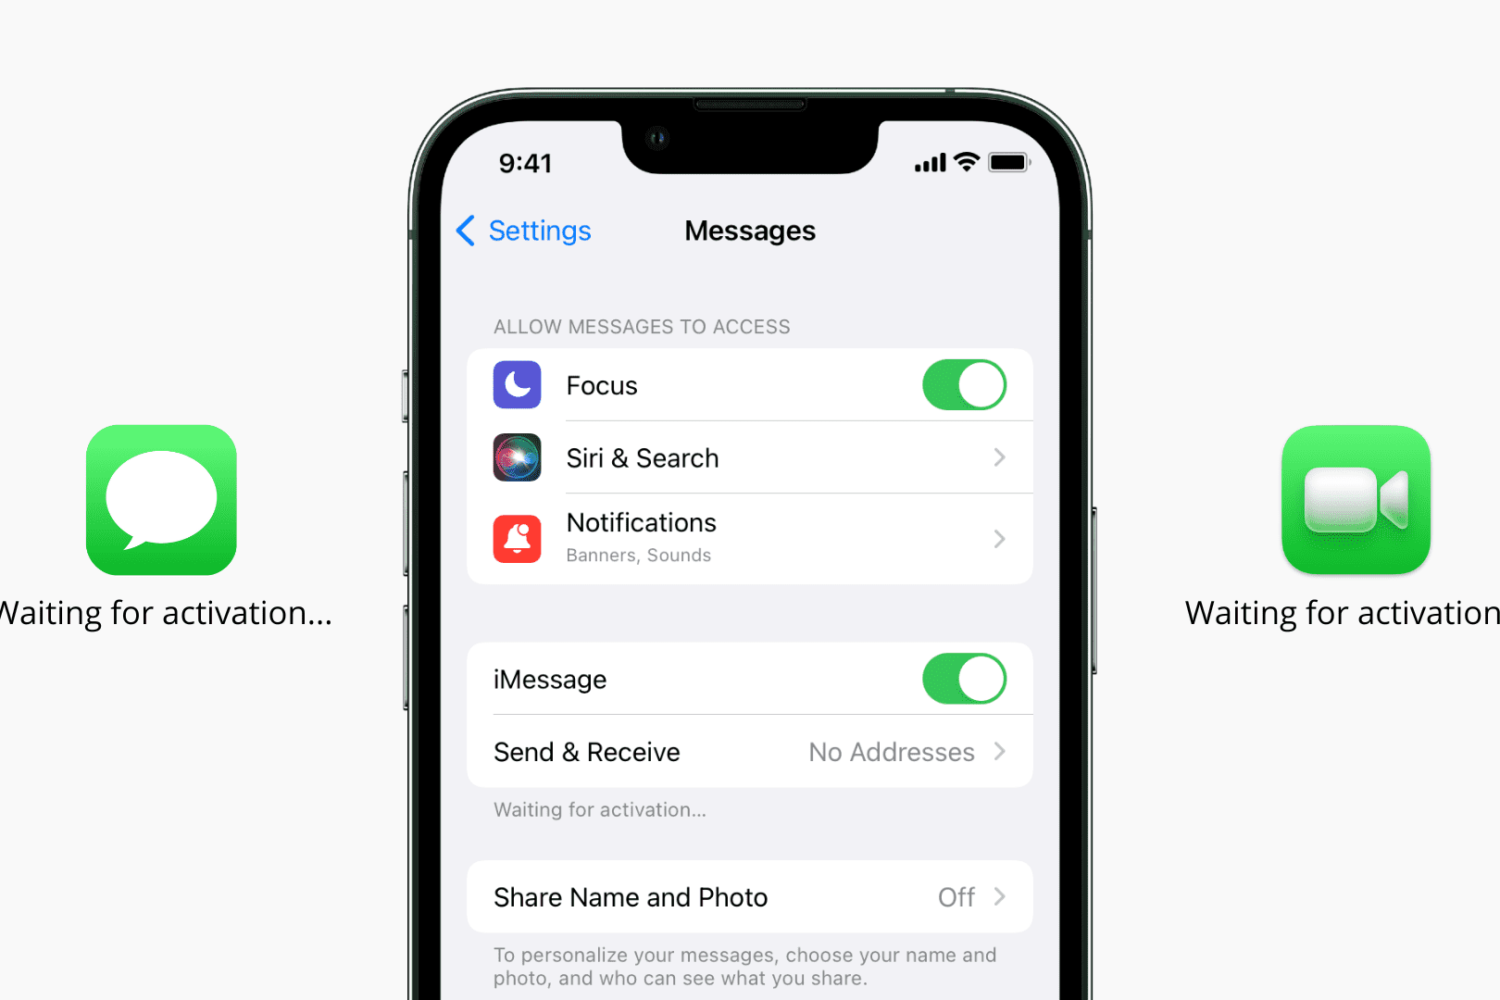 Fix Waiting for activation error in iMessage and FaceTime on iPhone